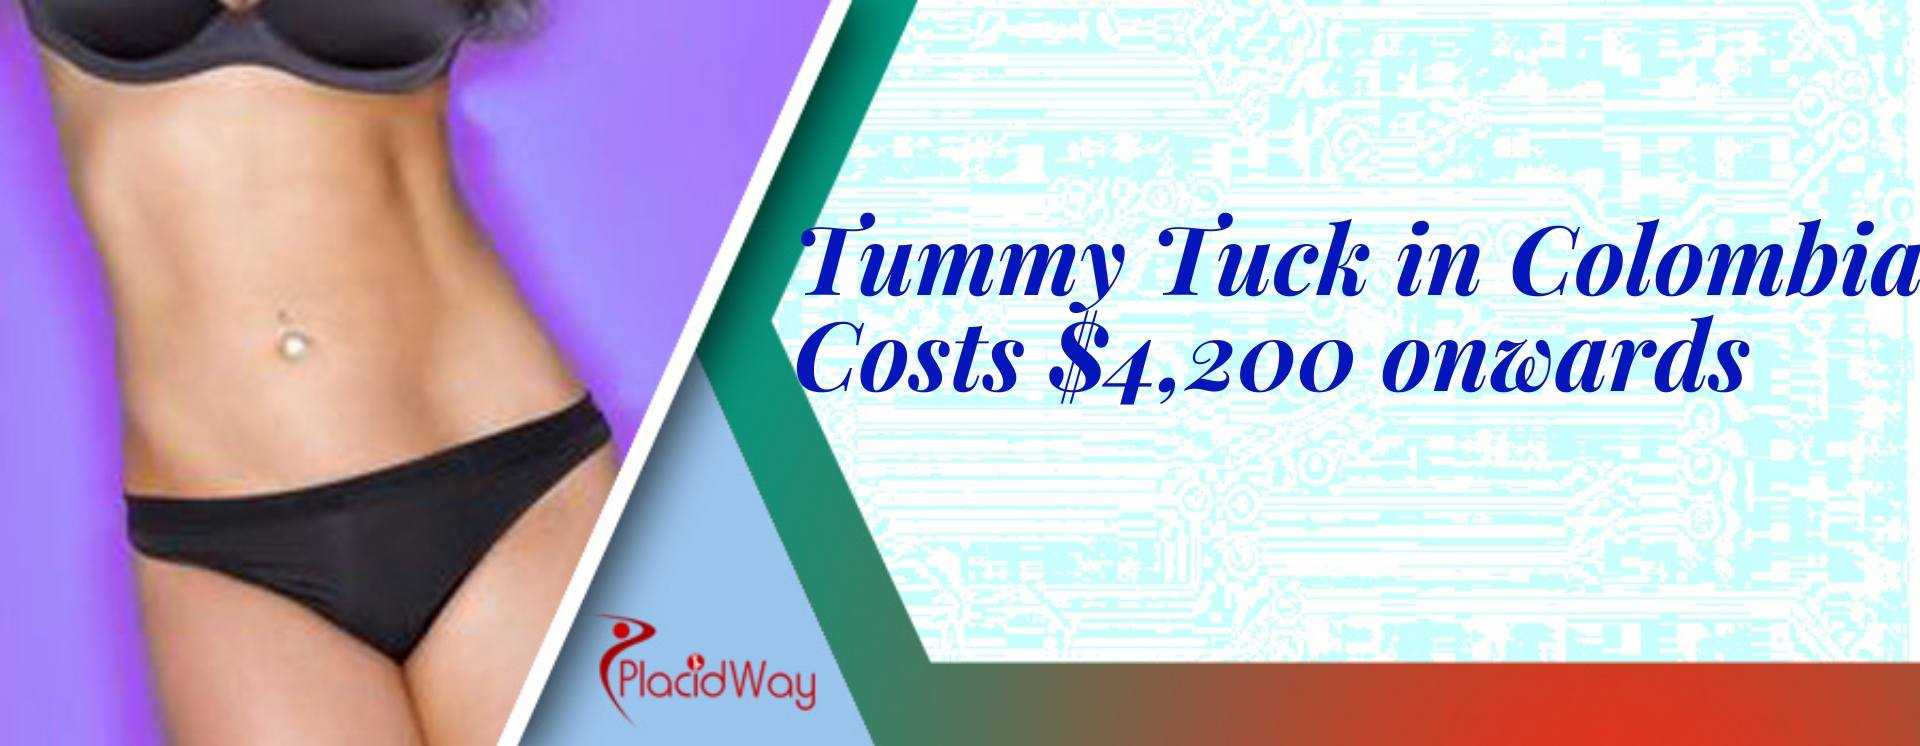 Cost of Tummy Tuck in Colombia